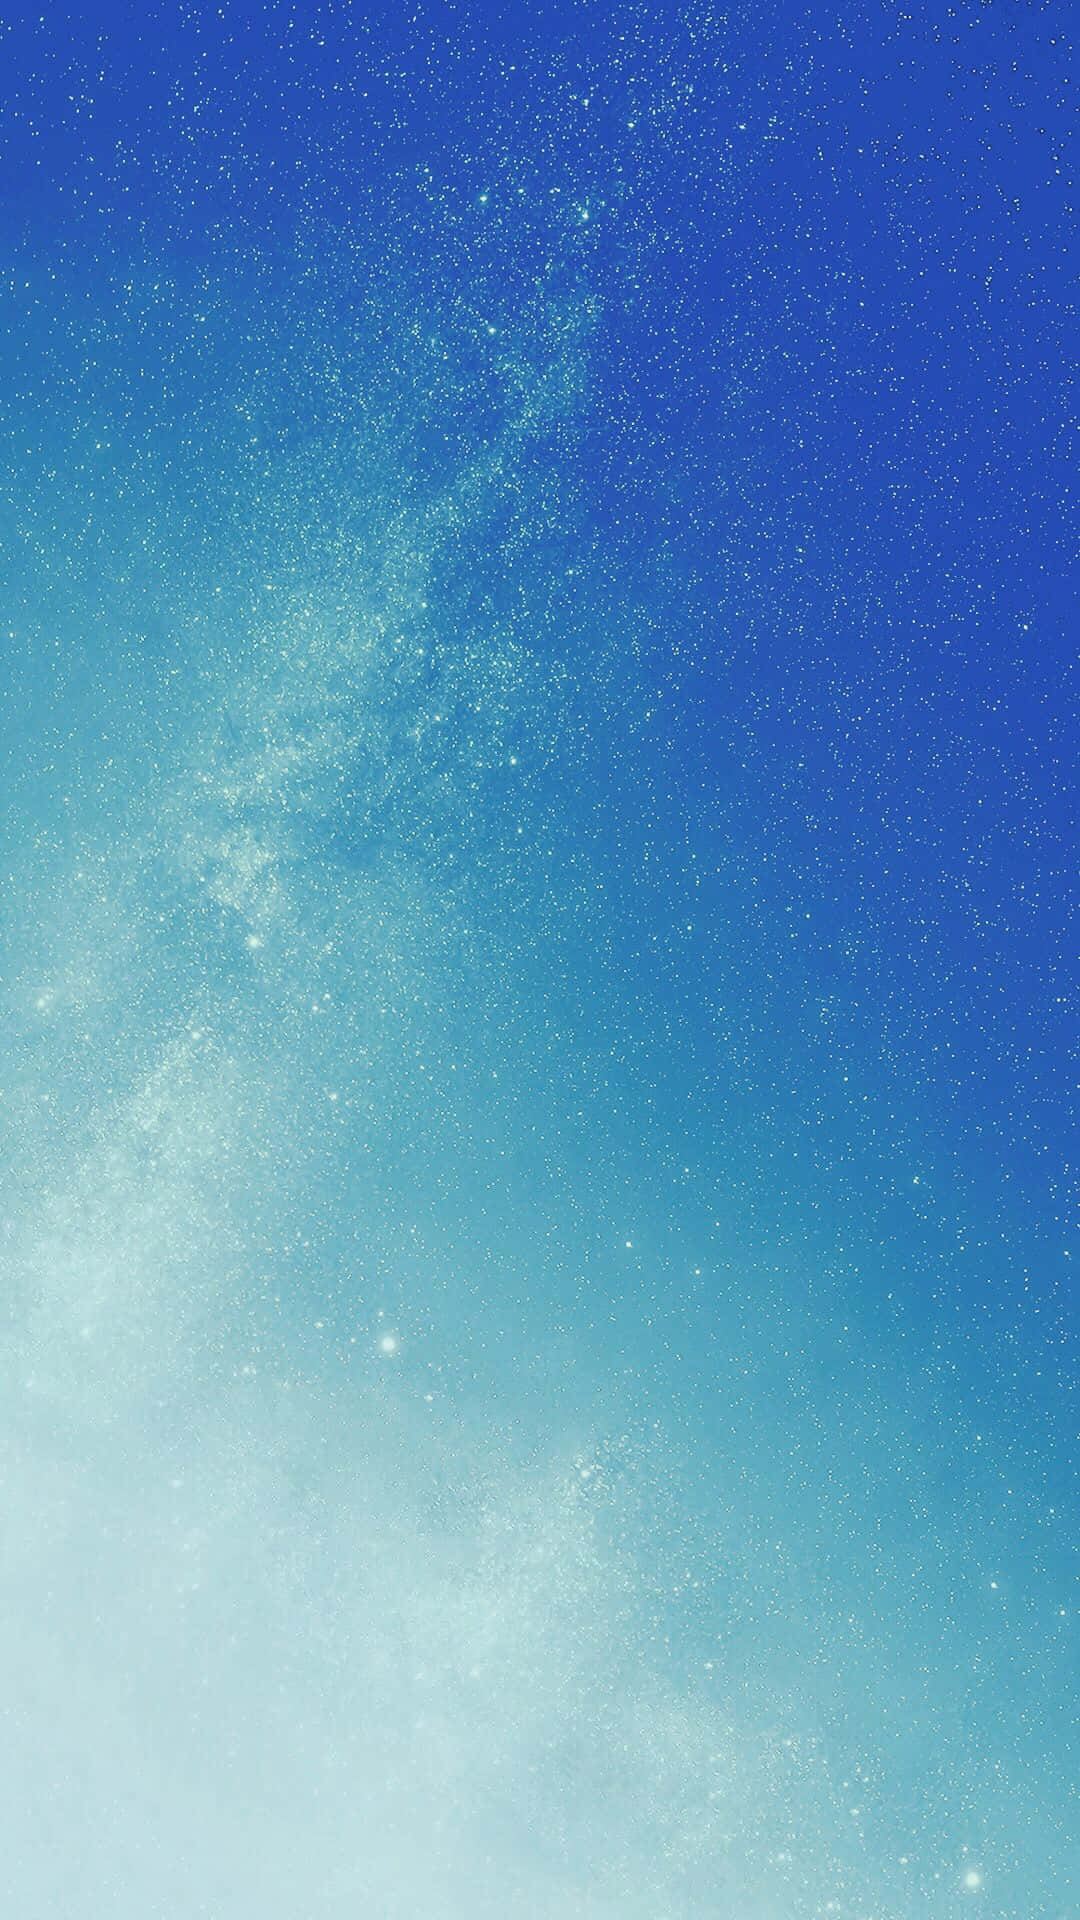 Delightful and Fun Blue Iphone Wallpaper